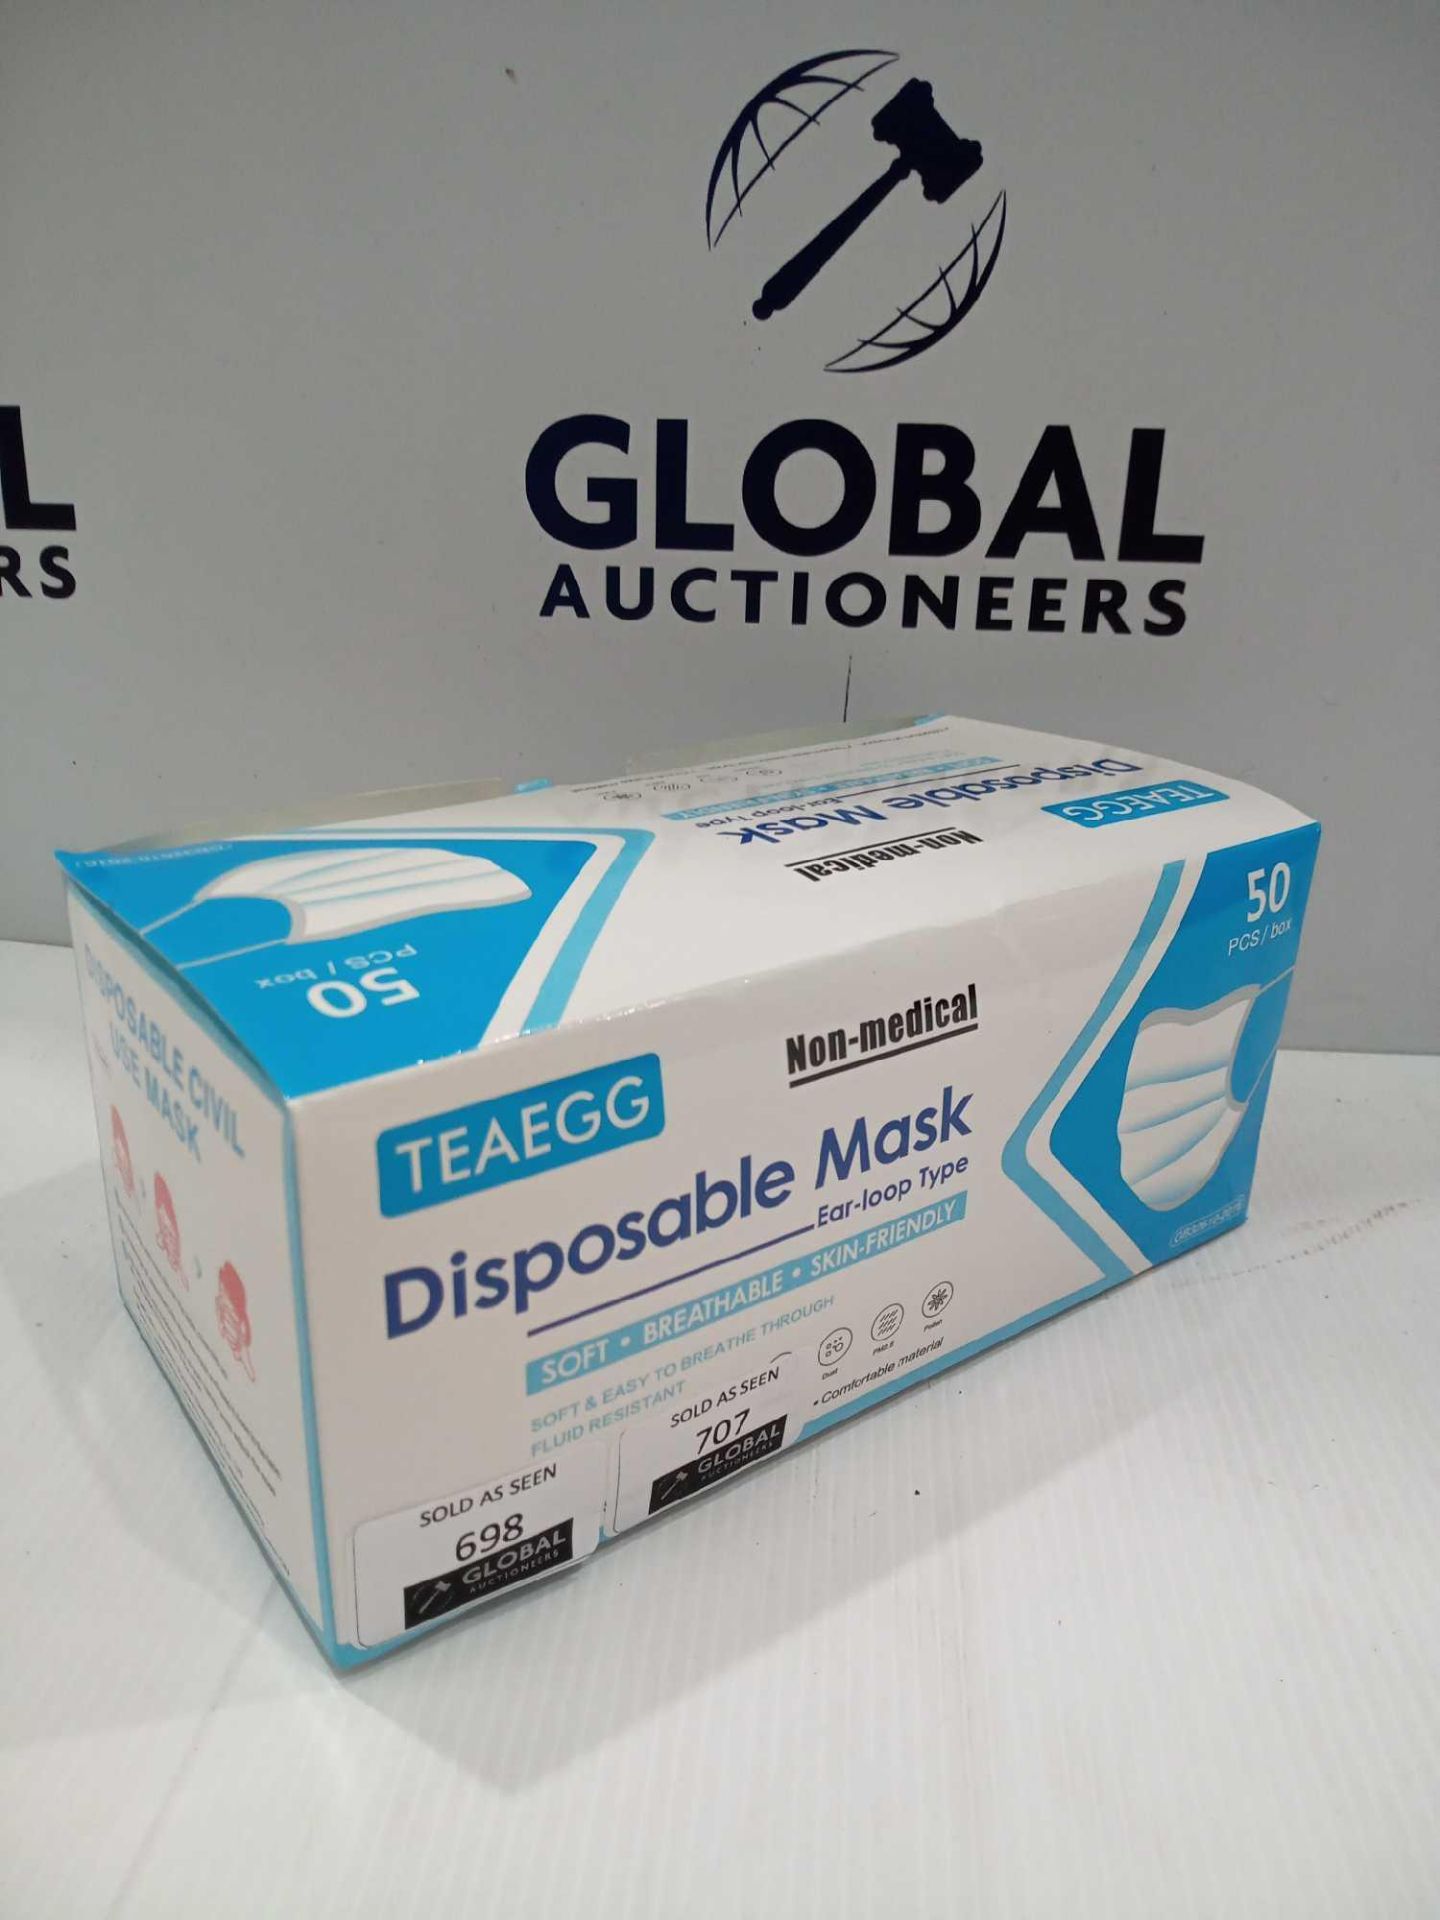 Rrp £300 Box To Contain 50 Brand New Teaegg Non-Medical Disposable 3Ply Earloop Type Soft And Breath - Image 2 of 2